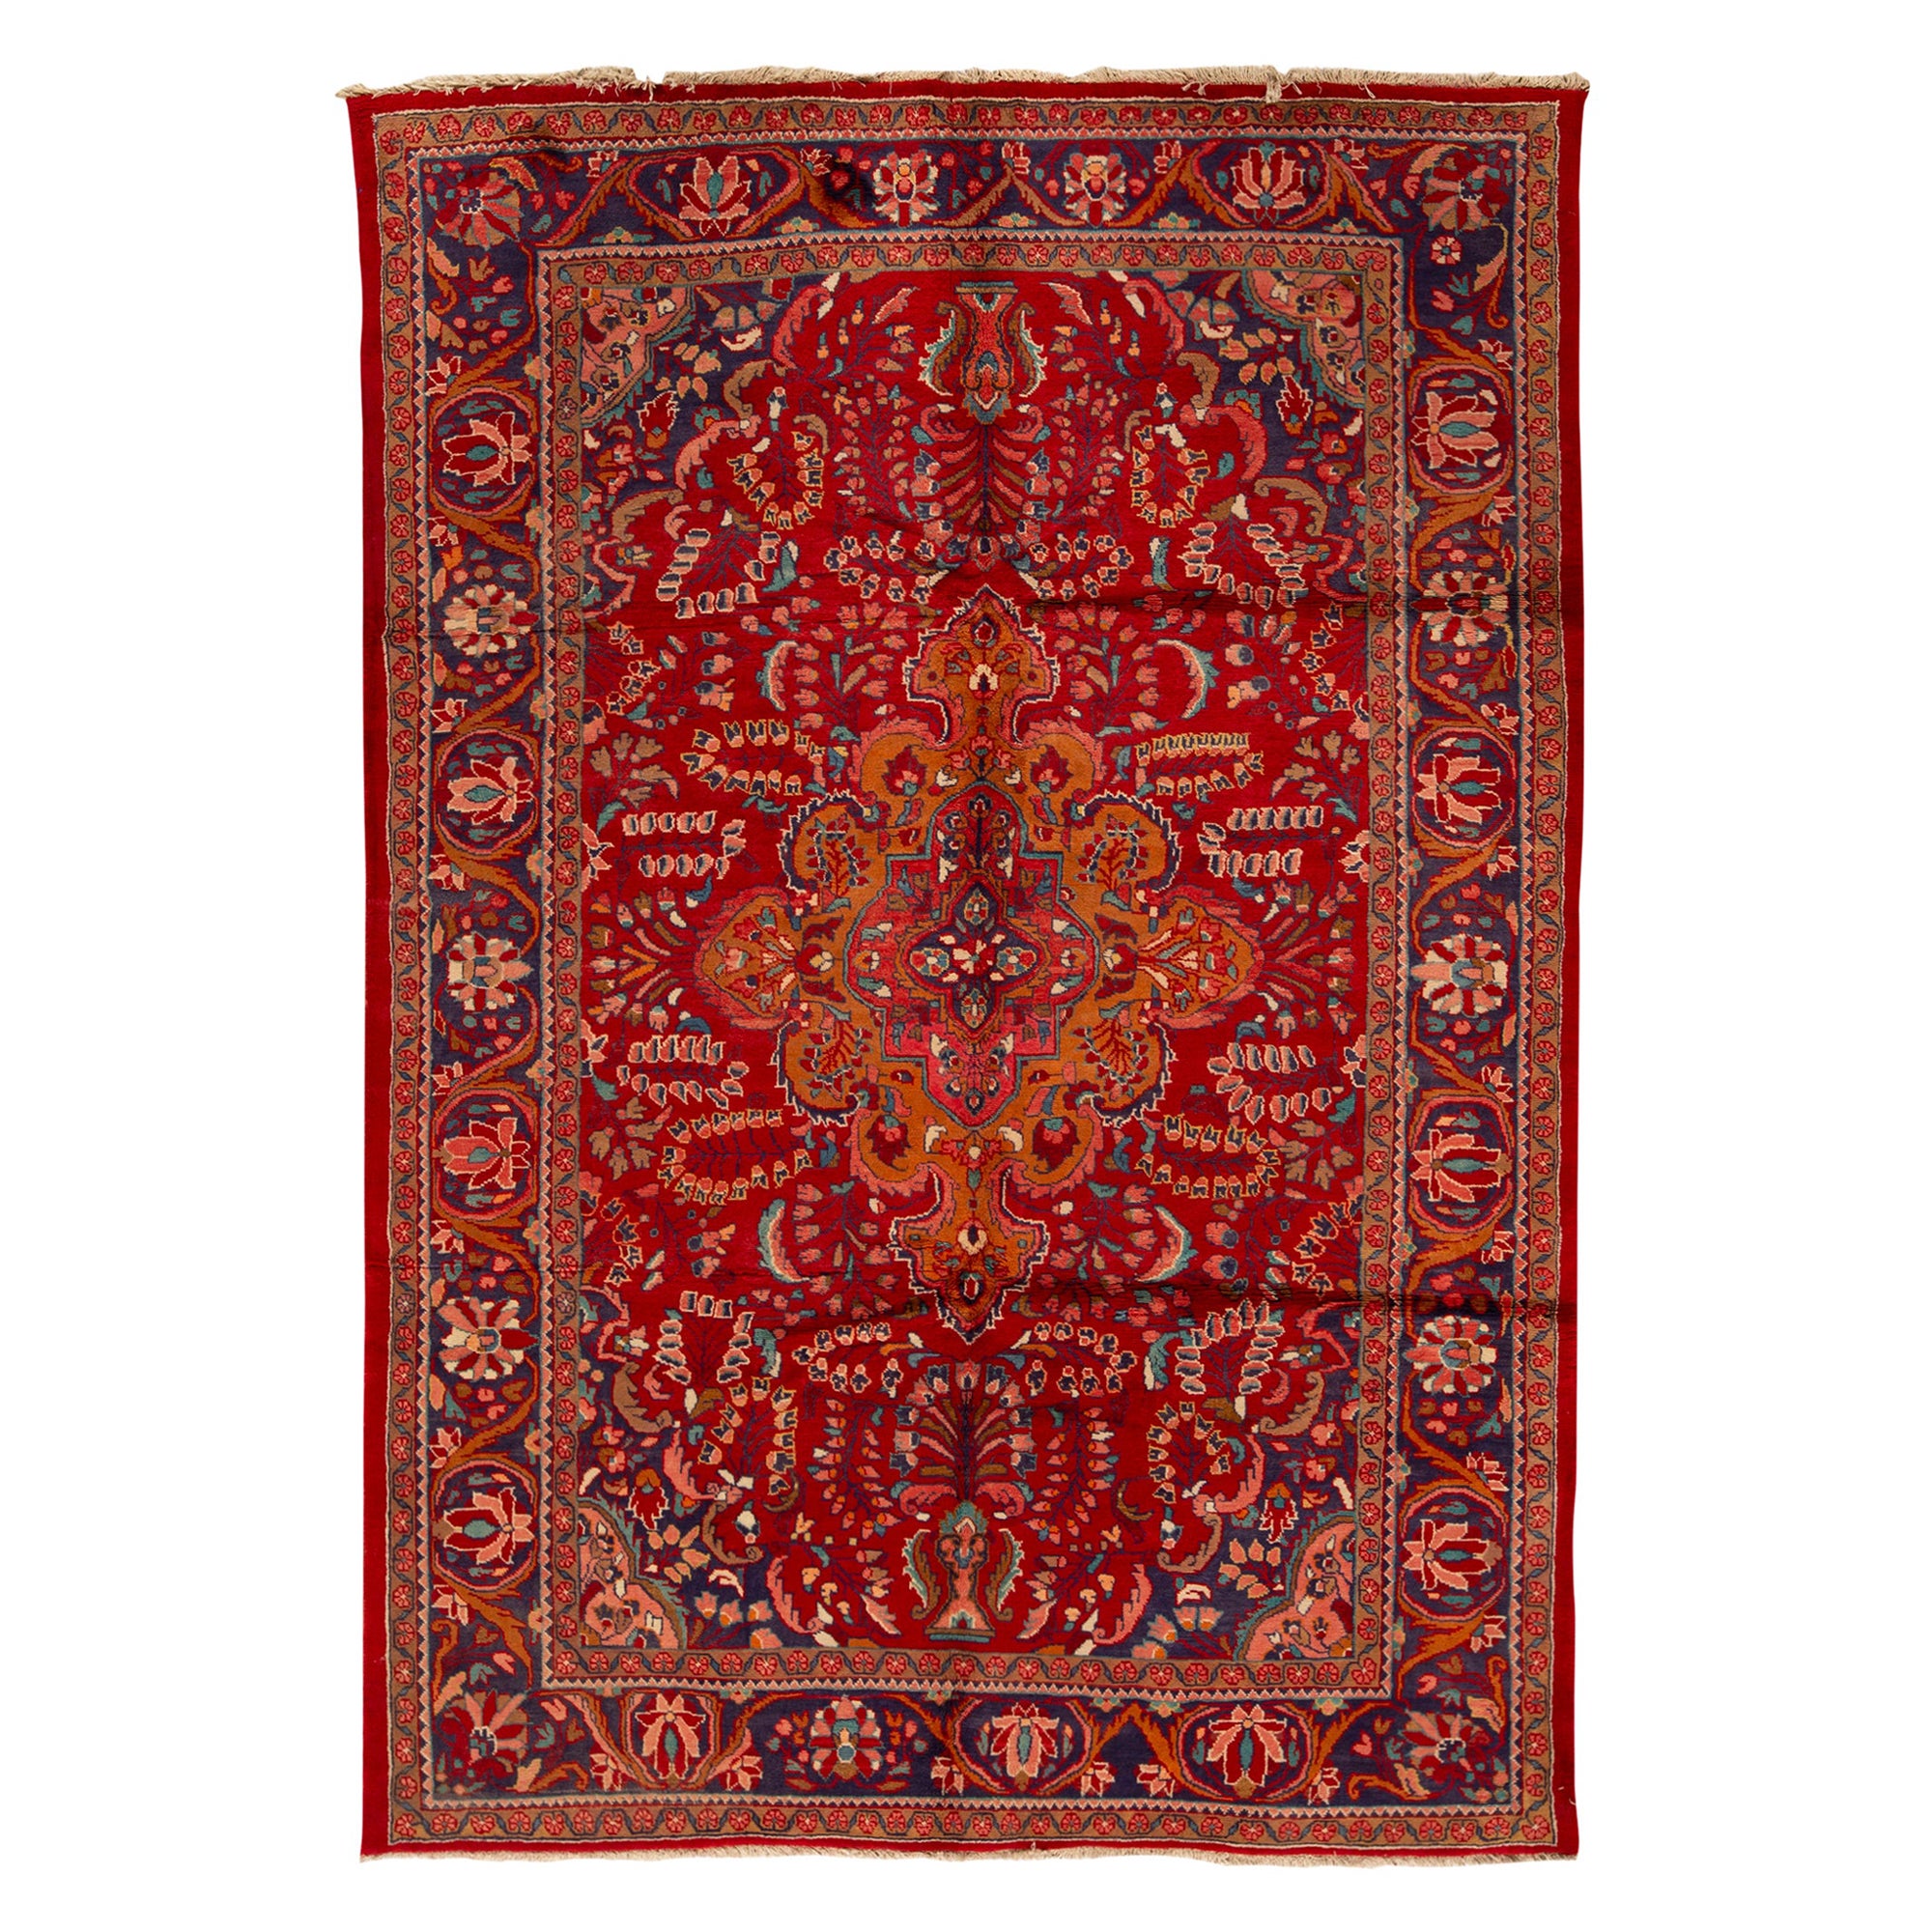   Antique Persian Fine Traditional Handwoven Luxury Wool Red / Blue Rug